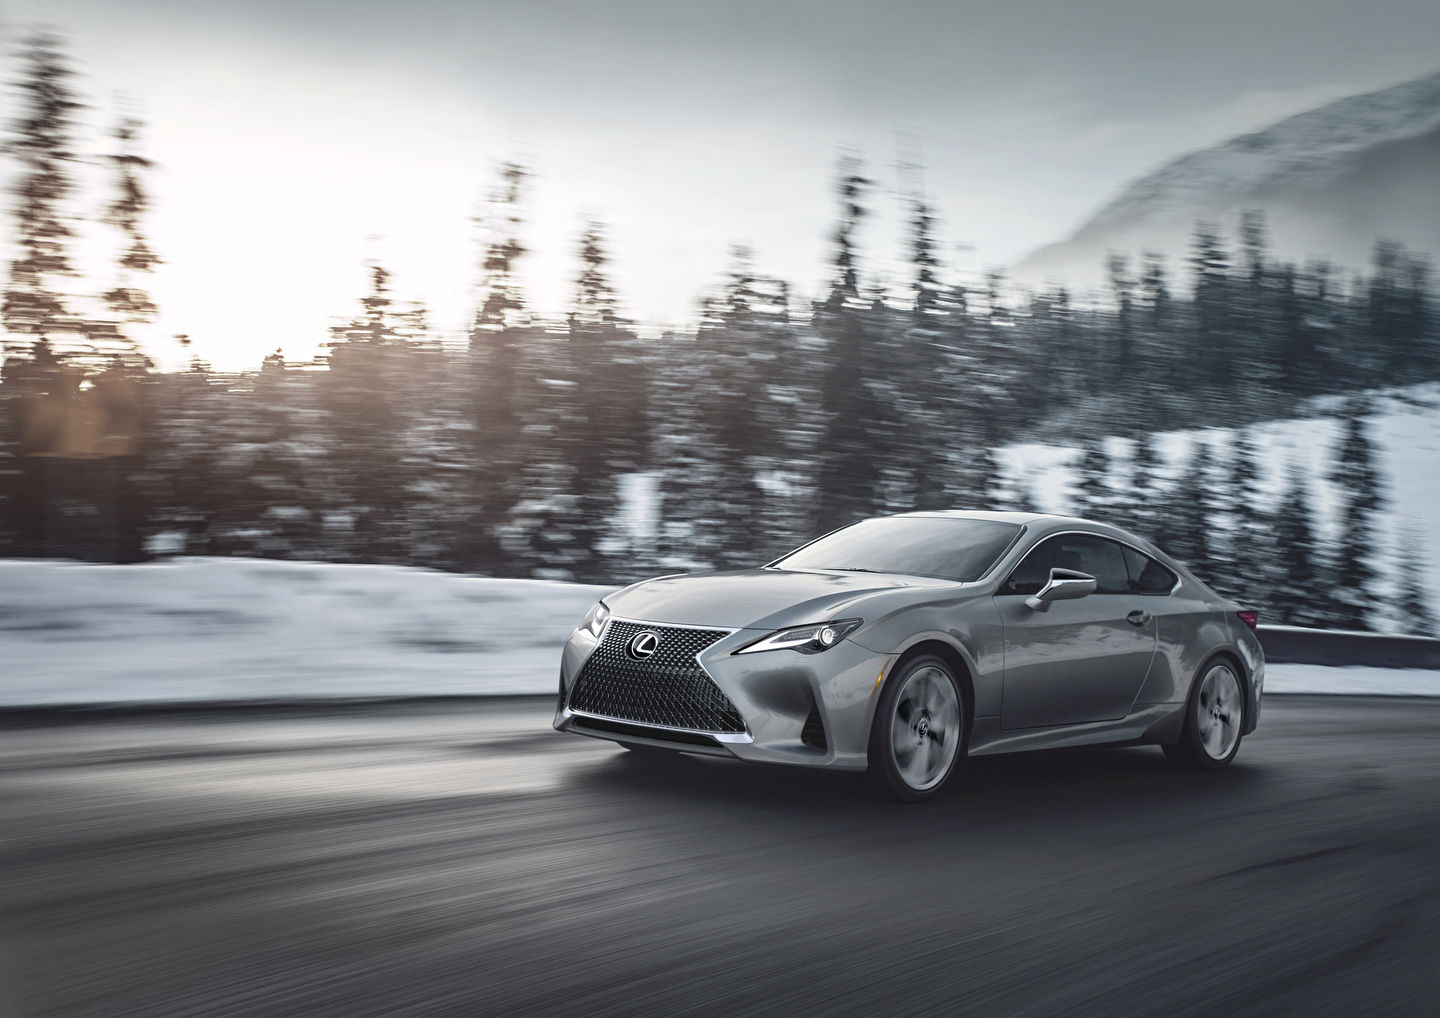 A Pre-Owned Lexus RC: A Prudent Choice for Luxury and Performance